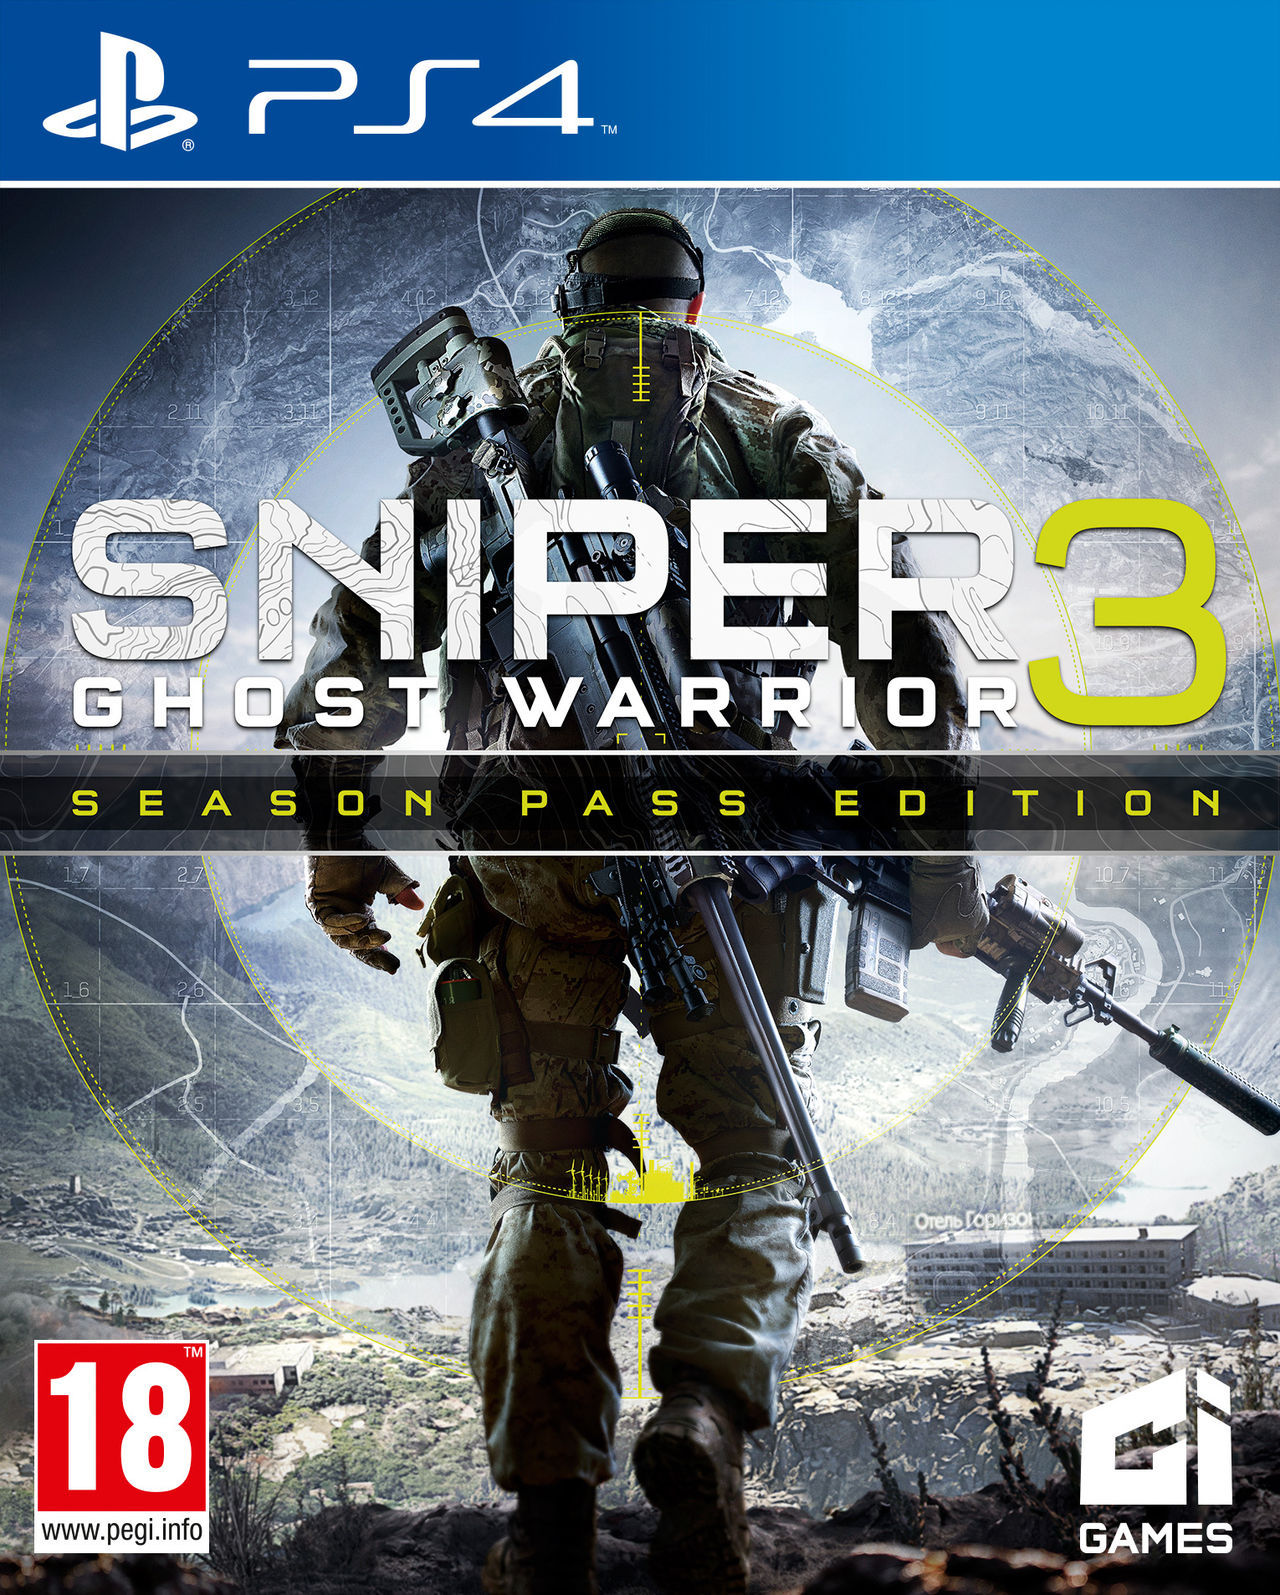 download xbox one games sniper